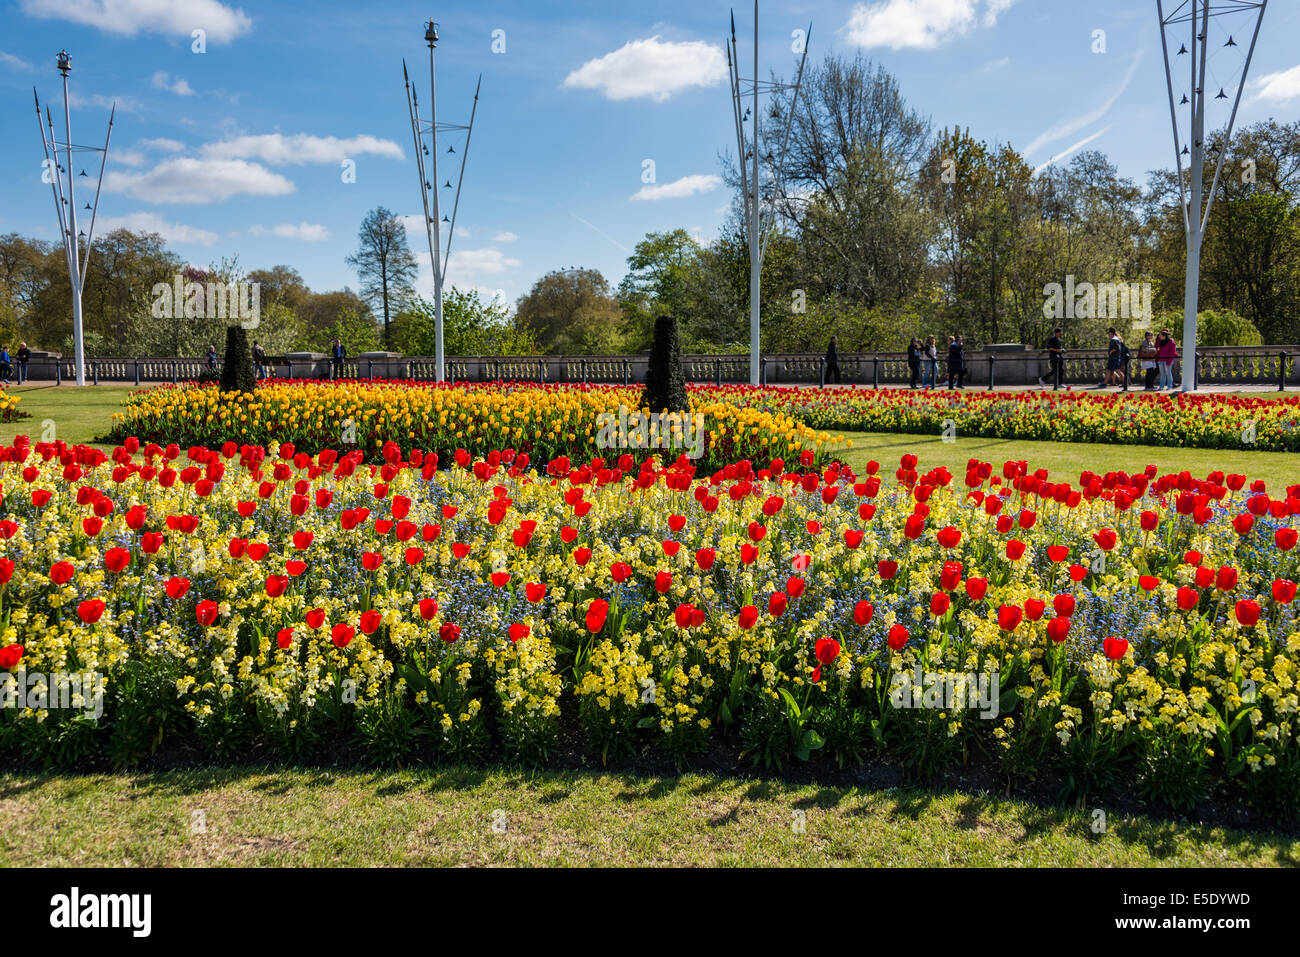 Flowerbeds outside of Buckingham Palace, the official London residence and principal workplace of the monarchy of the UK Stock Photo